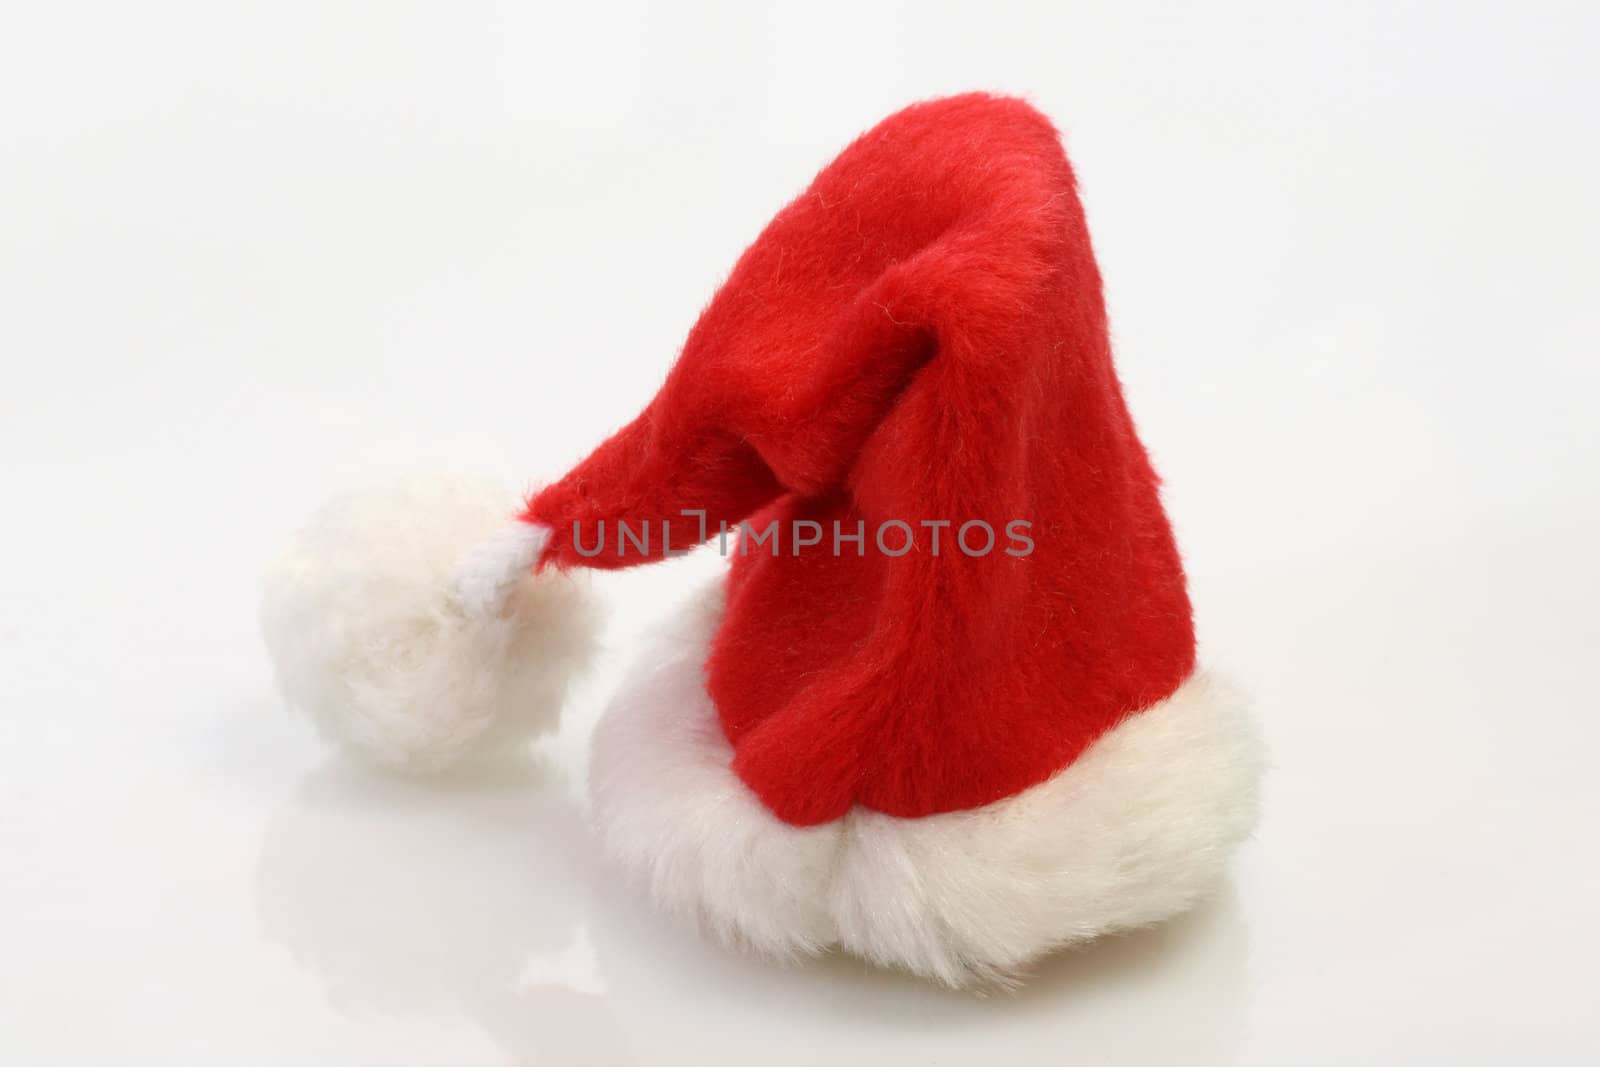 A Christmas Santa Claus hat on a white background